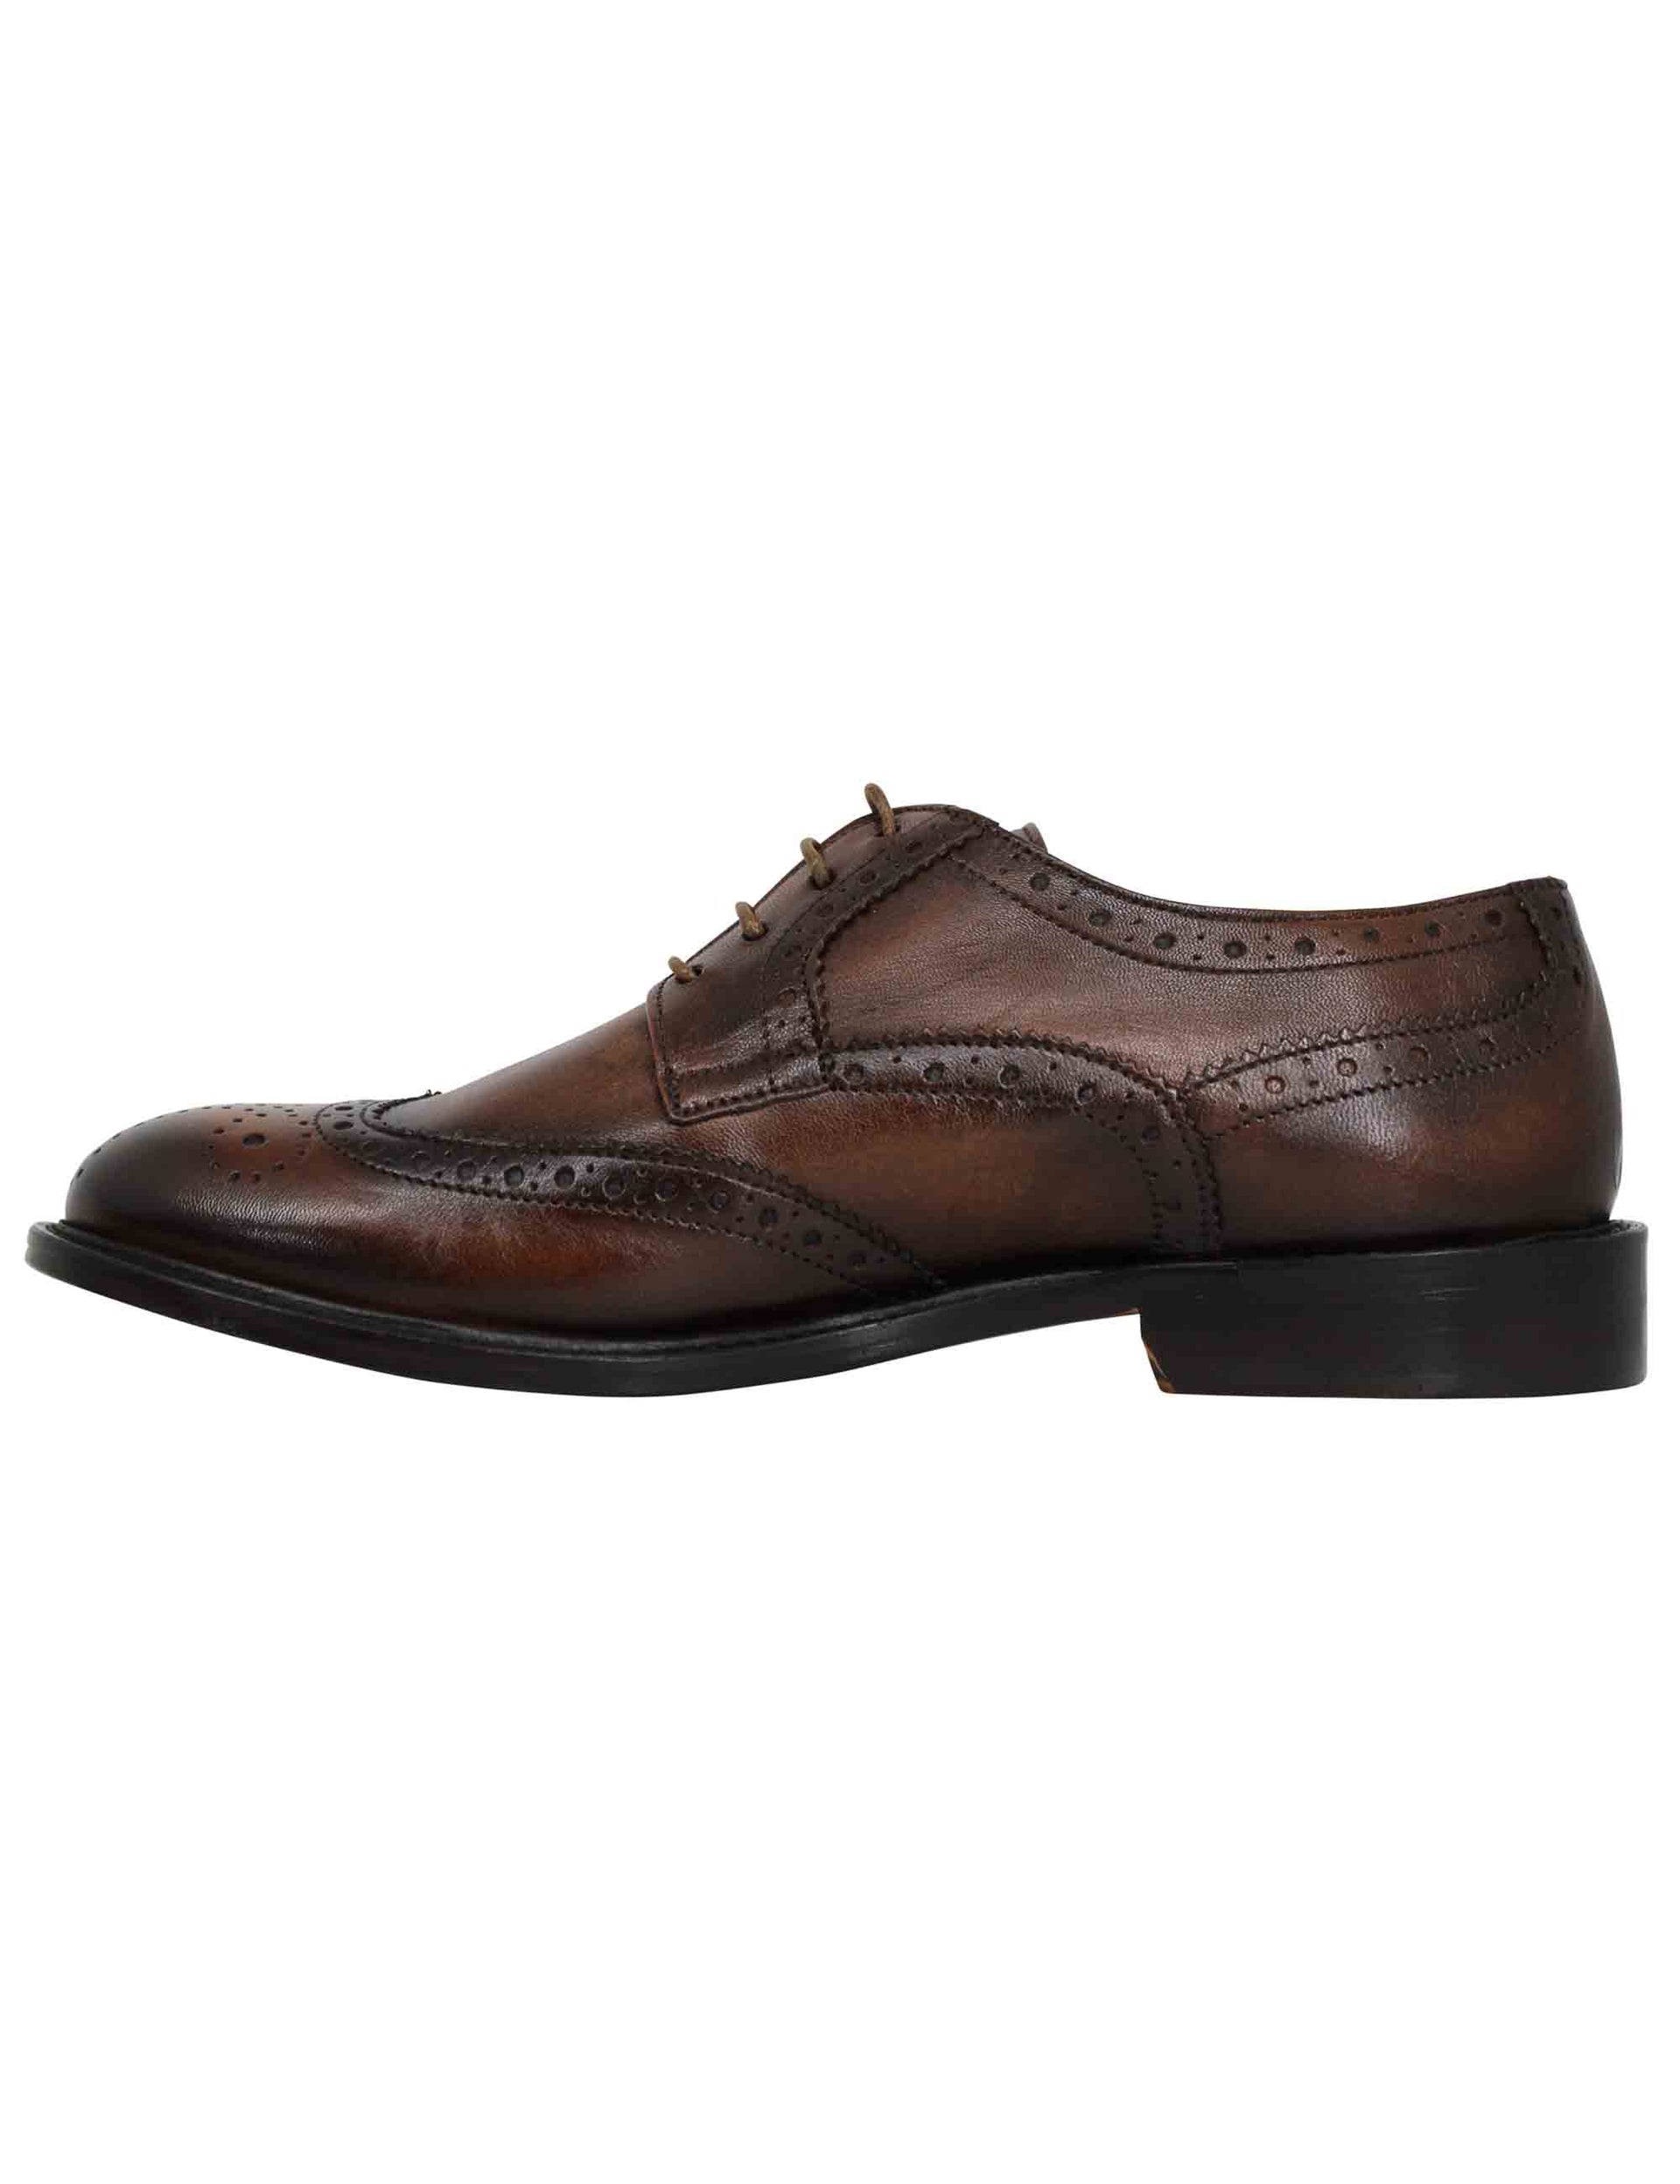 Men's lace-ups in stitched brown leather with stitched leather sole